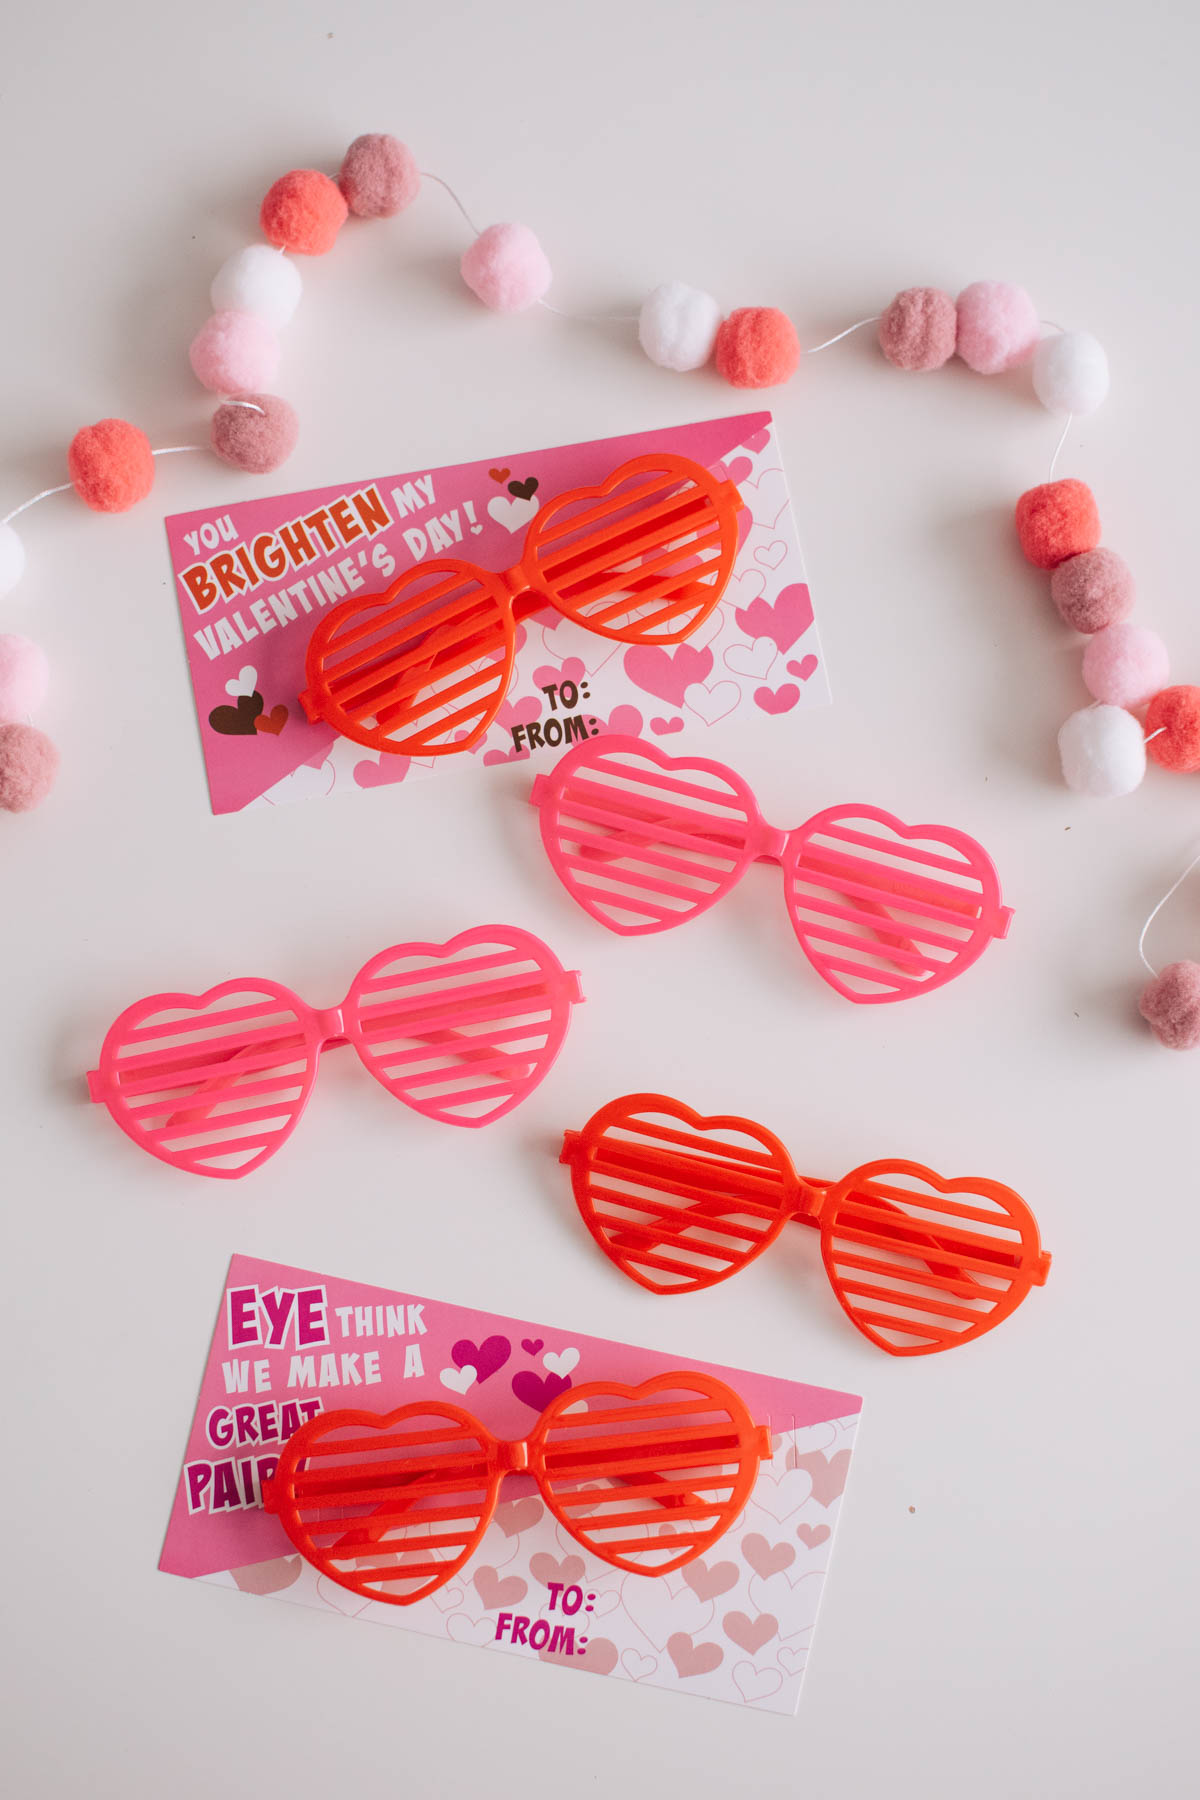 Heart-shaped pink and red sunglasses with Valentine's Day cards.